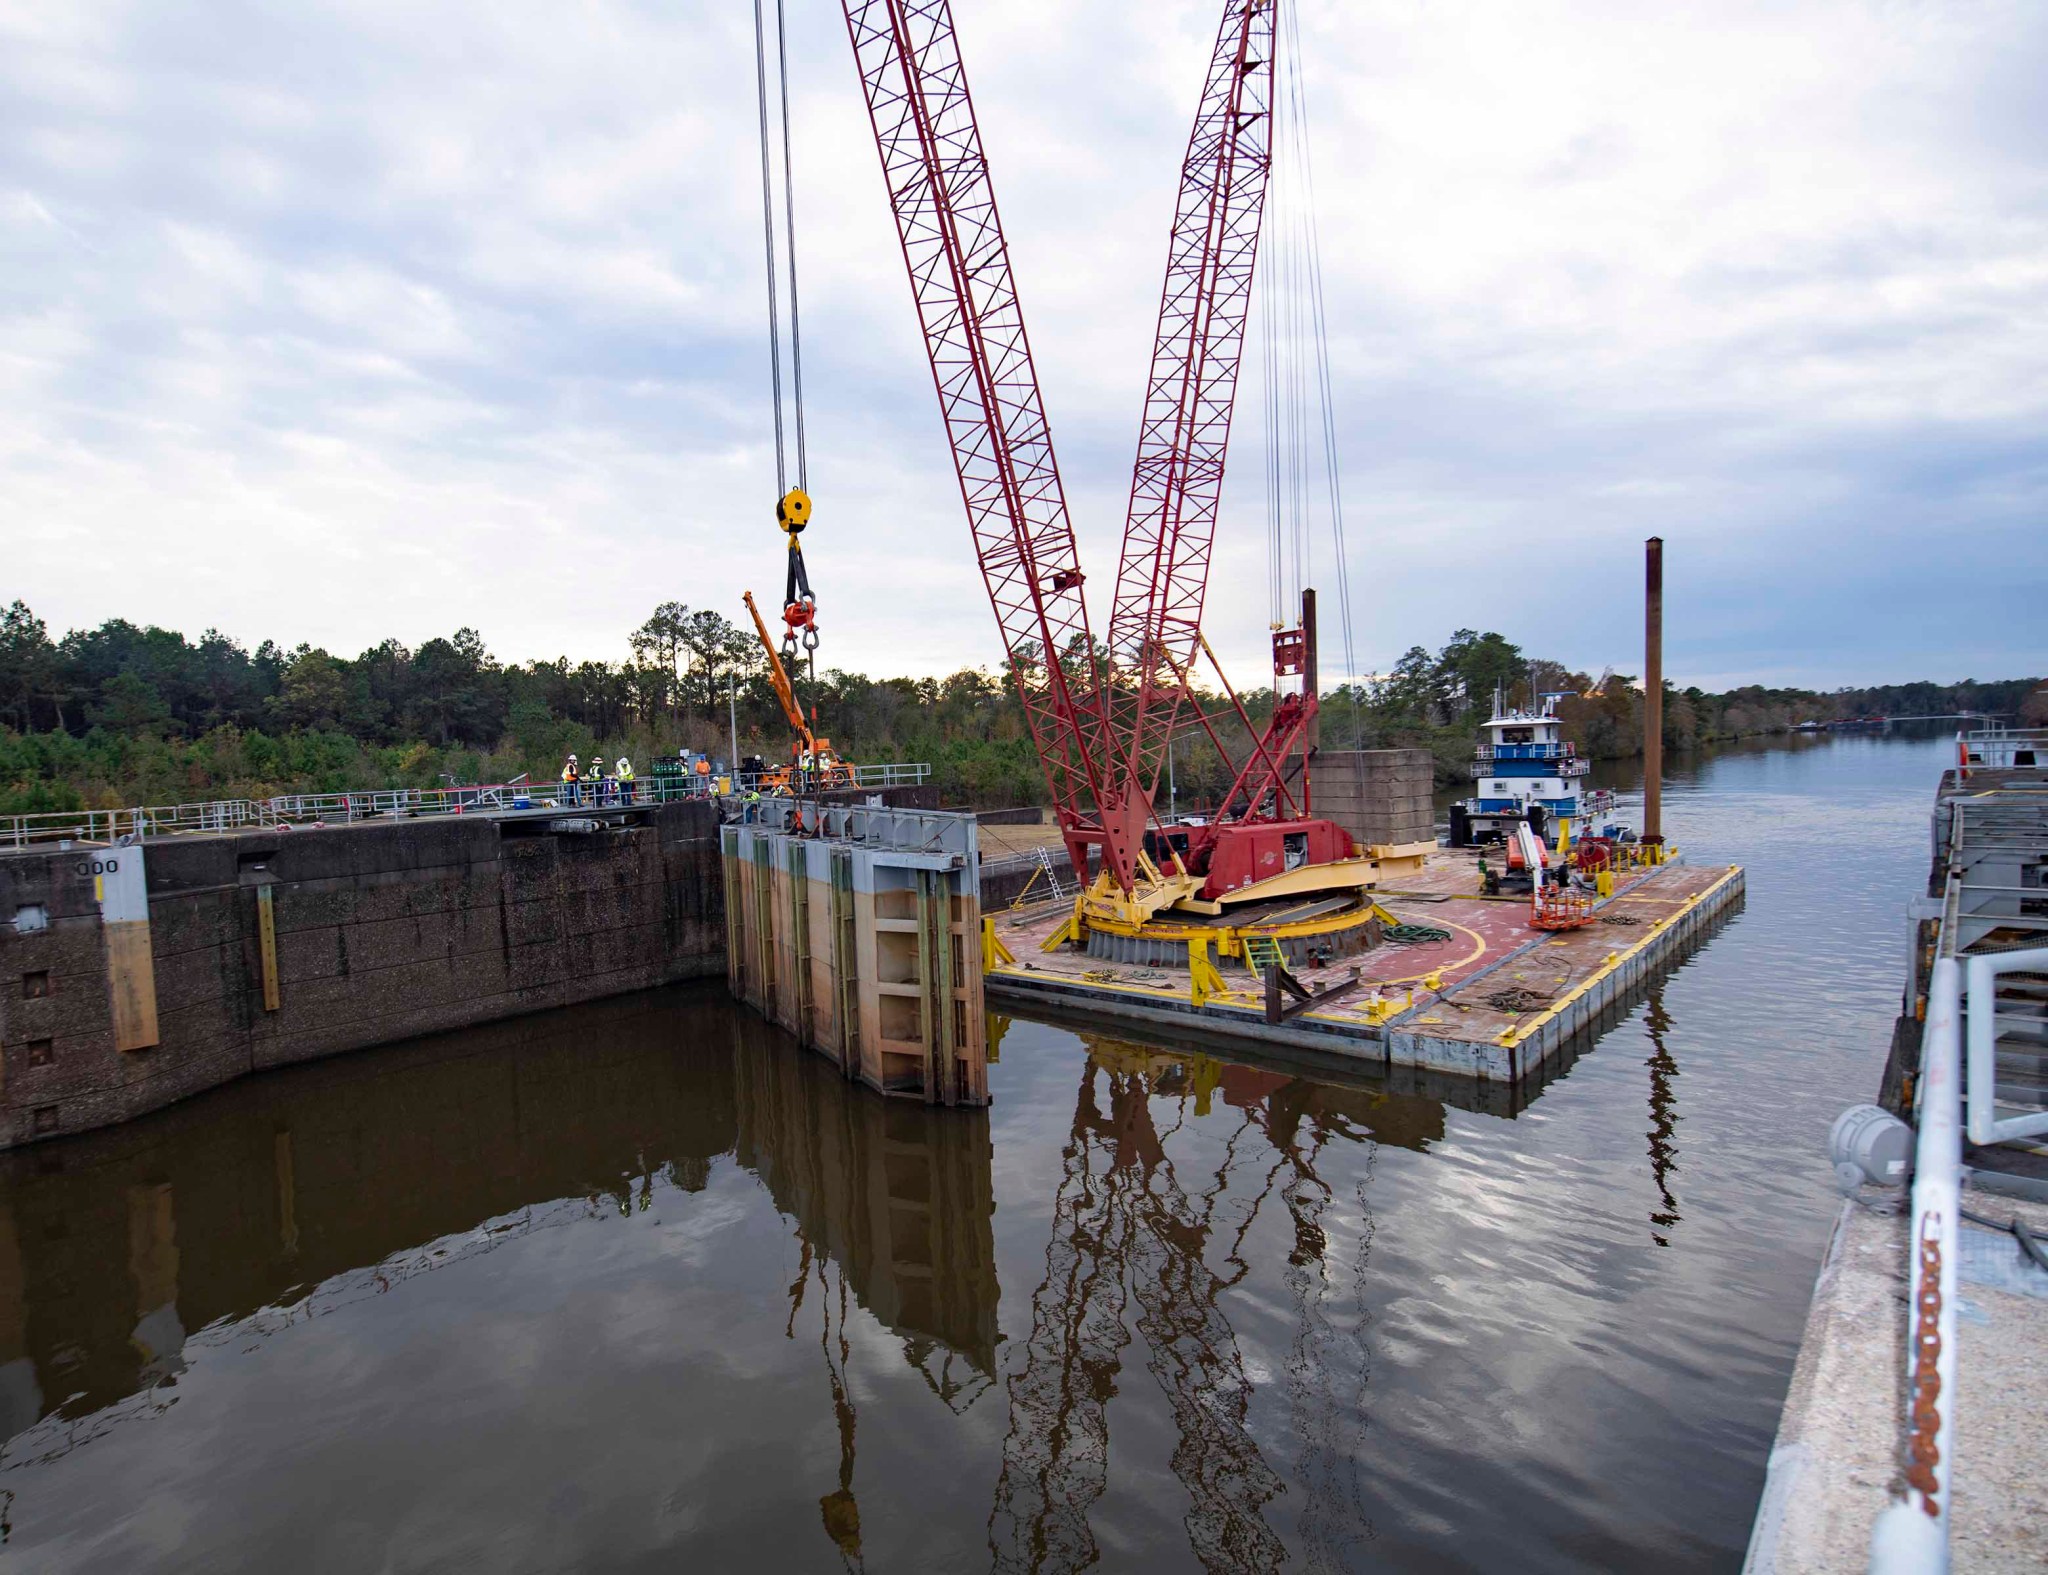 Crews install steel structures known as stop logs at the waterway to NASA’s Stennis Space Center